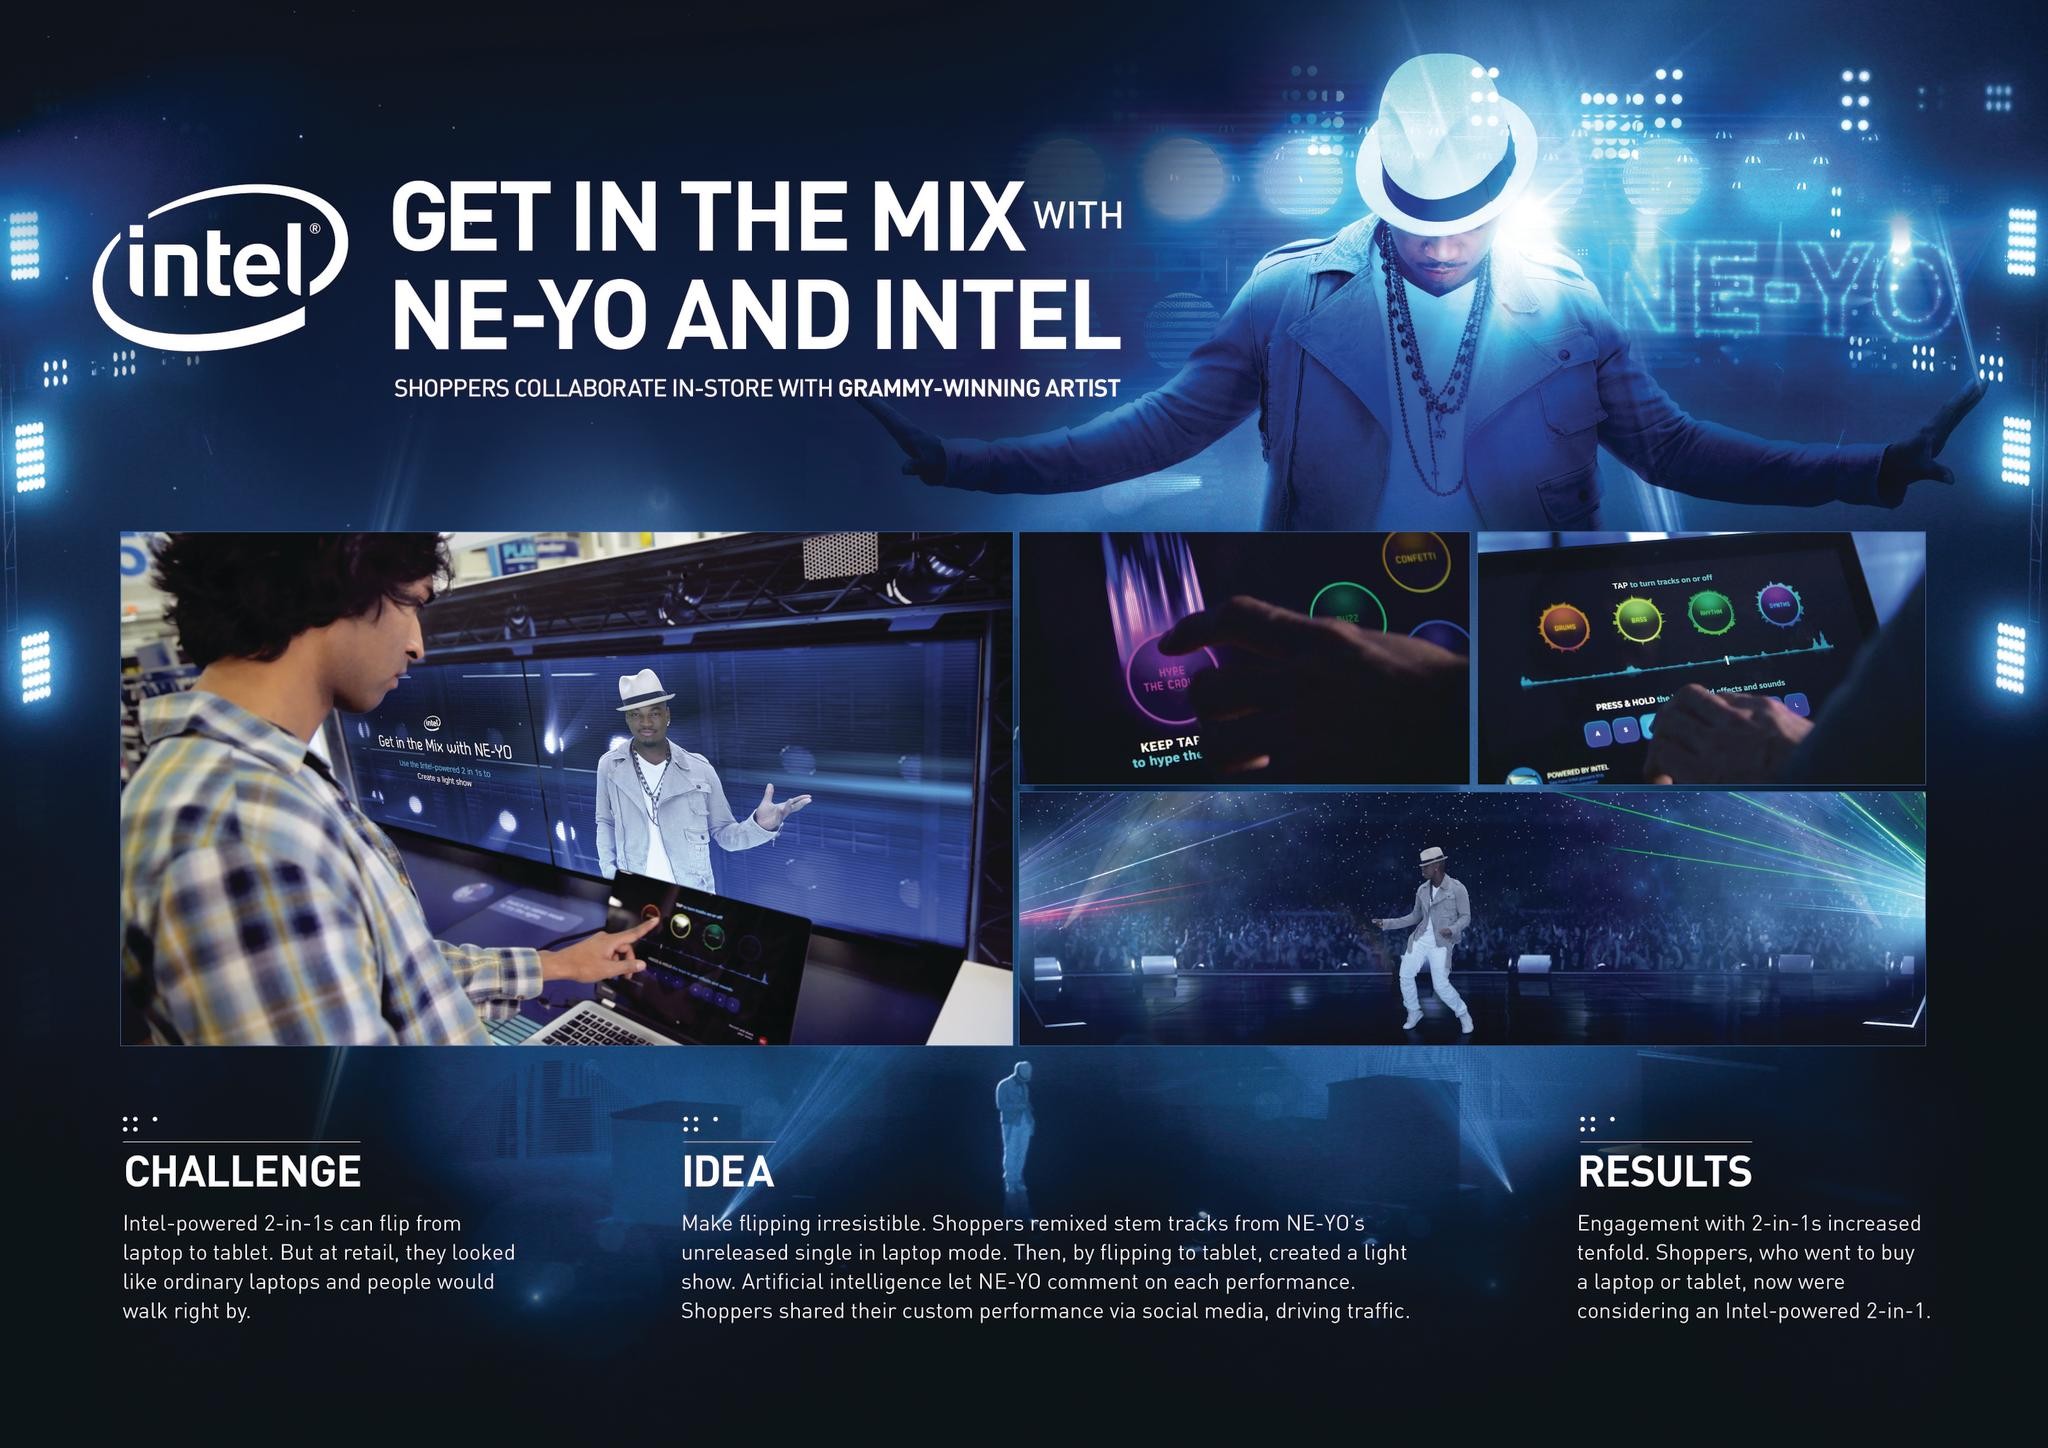 GET IN THE MIX WITH NE-YO: THE INTEL EXPERIENCE